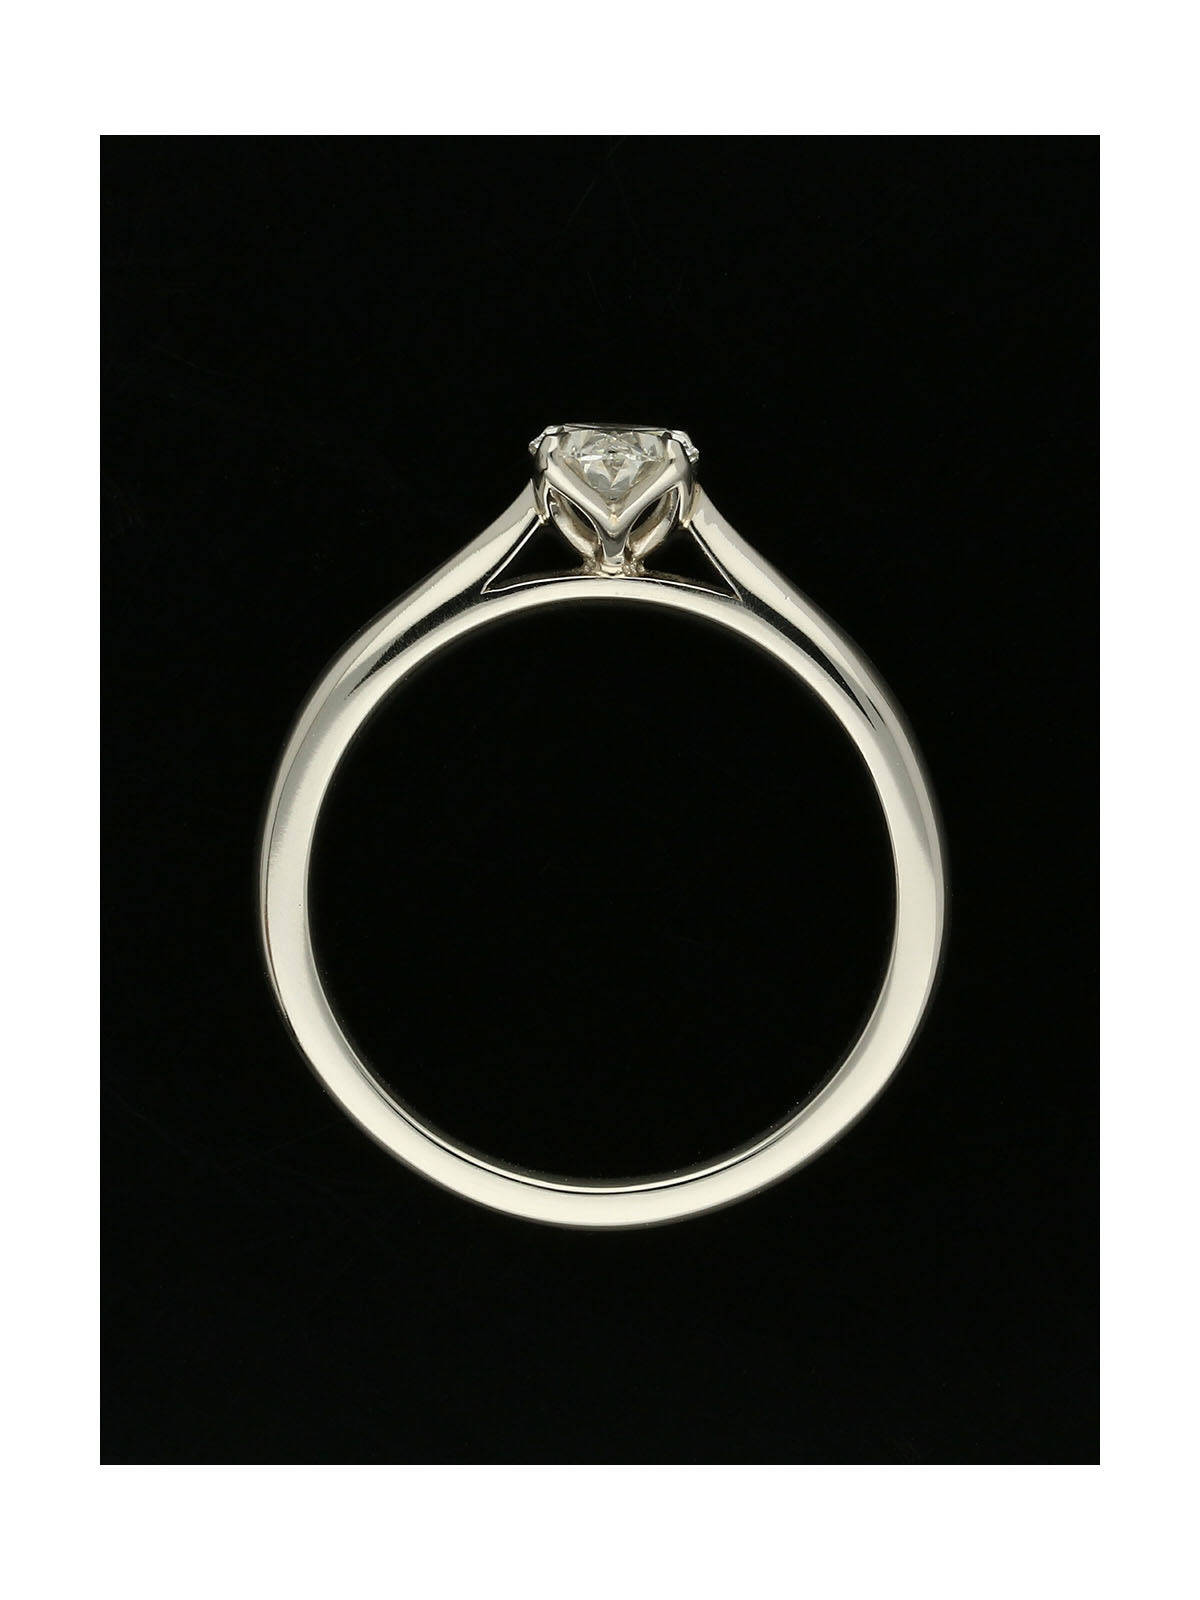 Diamond Solitaire Engagement Ring 0.70ct Certificated Oval Cut in Platinum